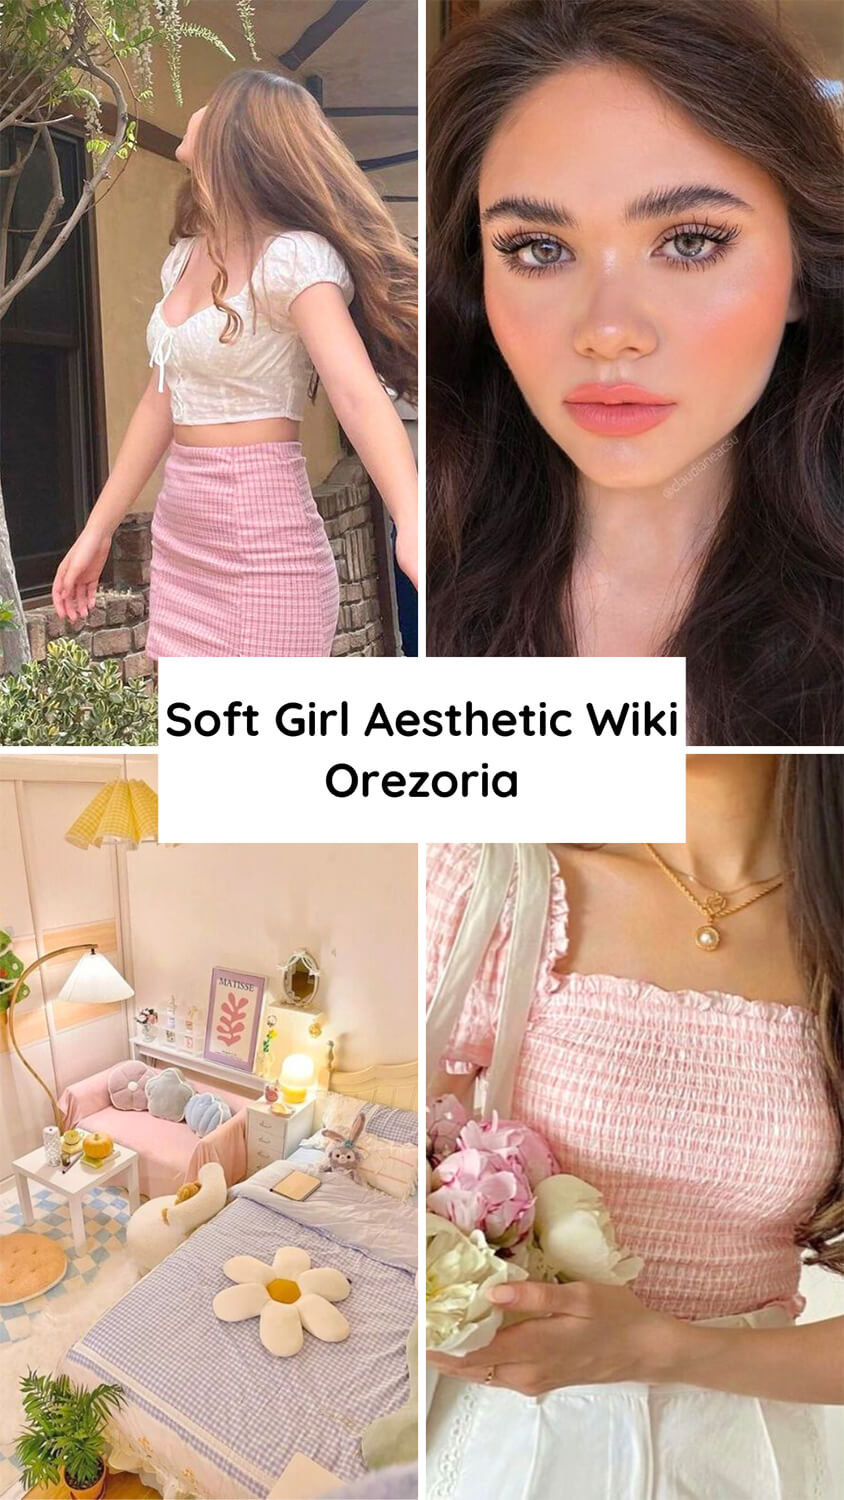 What is the Soft Girl Aesthetic? Aesthetics Wiki